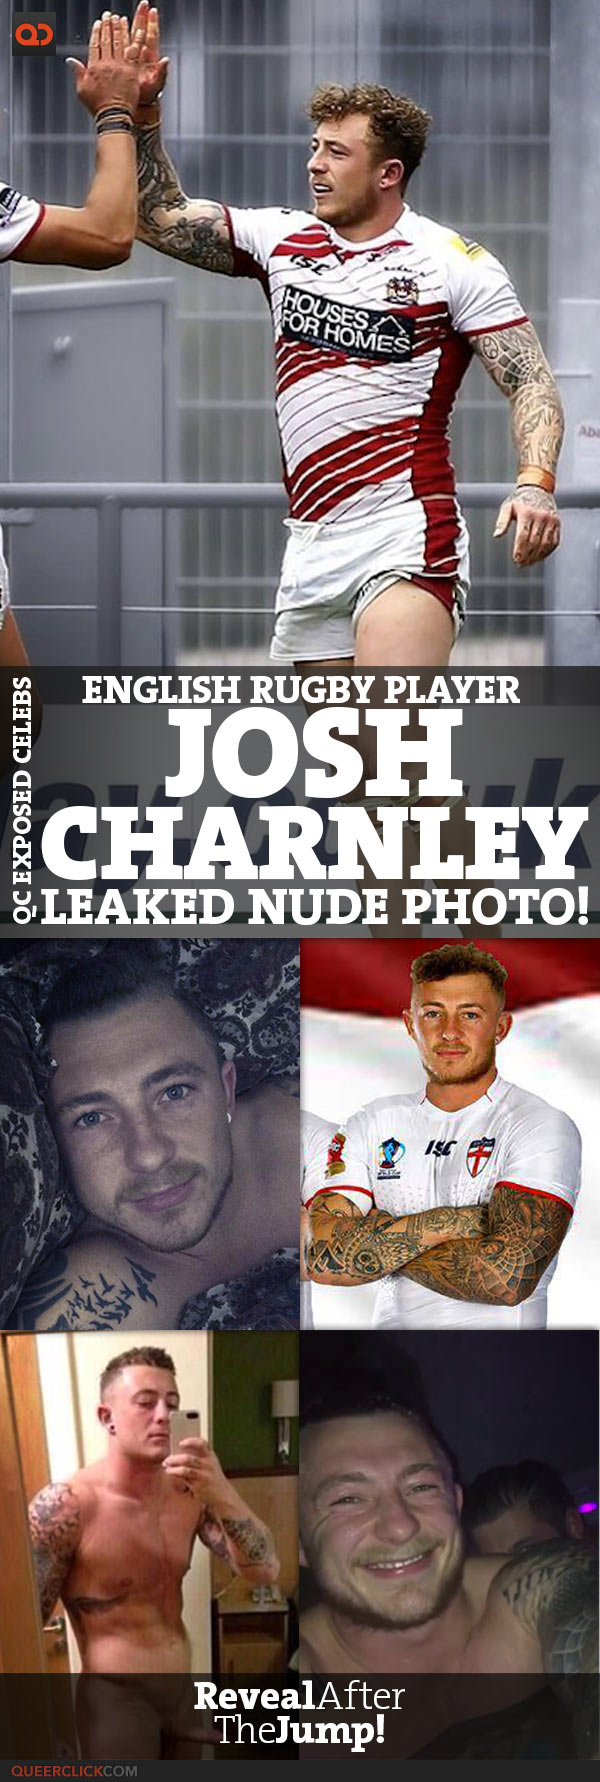 qc-exposed-english_rugby_player_joshua_charnley-teaser